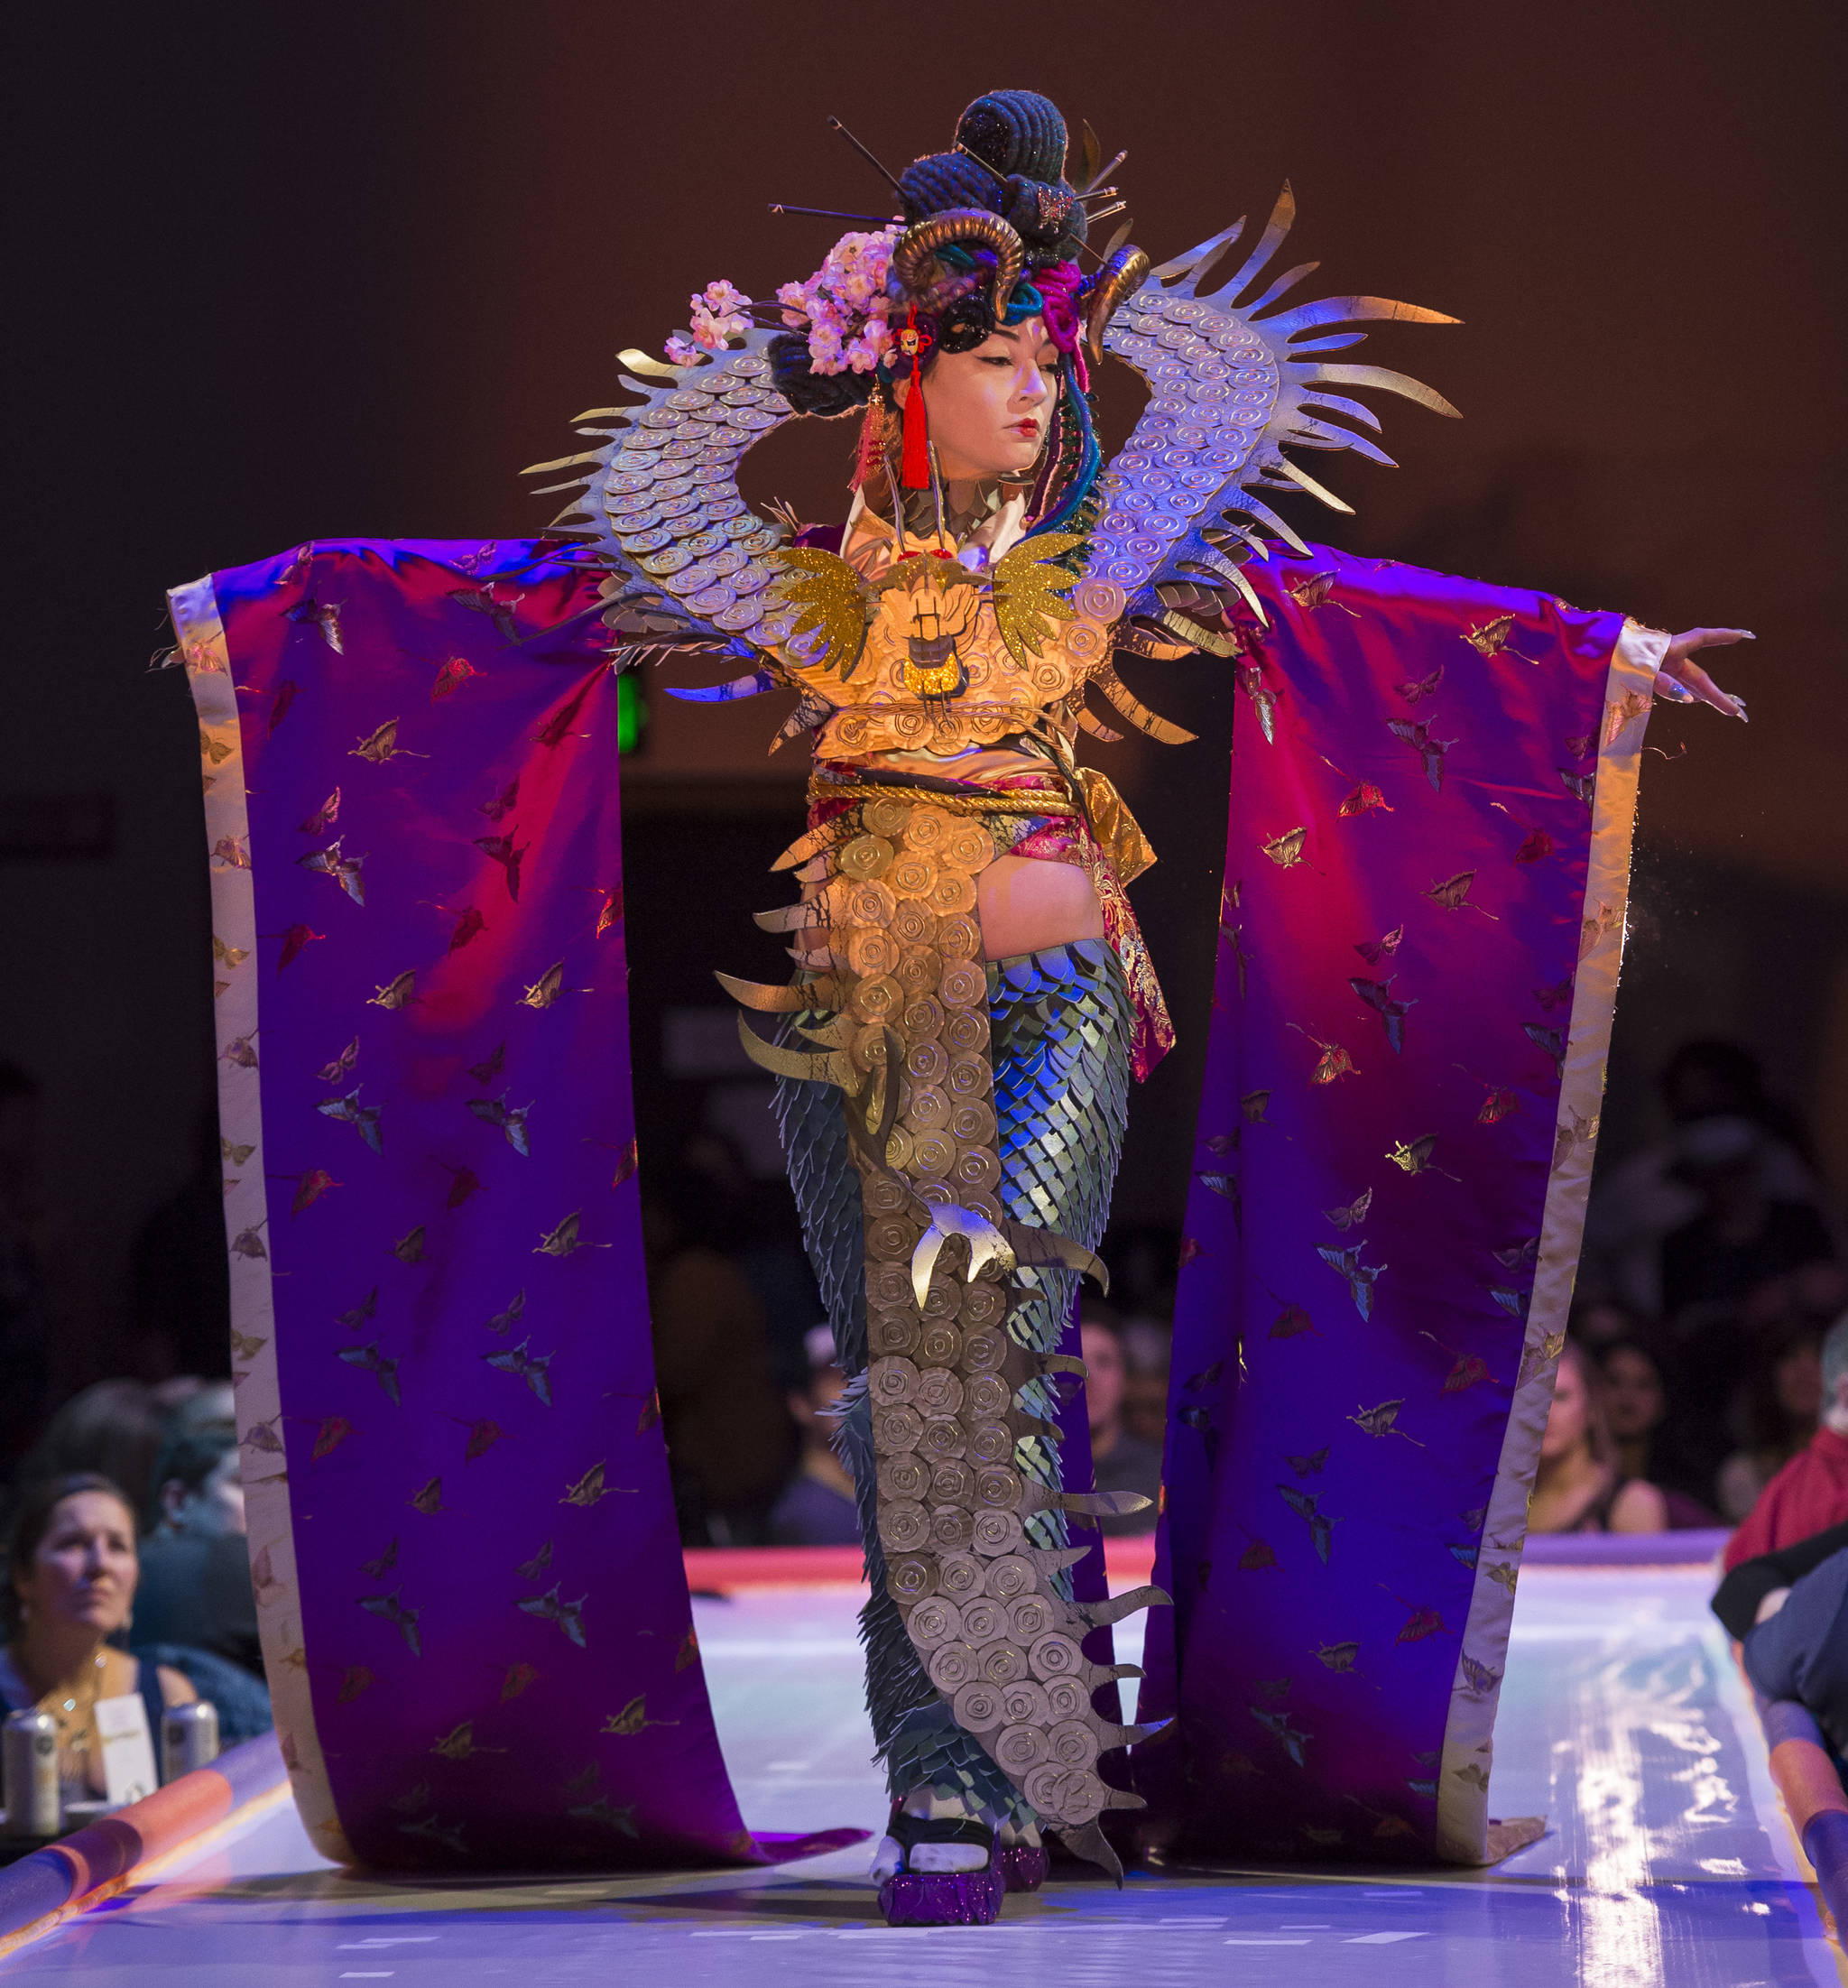 “Doragon” by Beth Bolander, modeled by Dani Gross, at the Wearable Art Show at Centennial Hall on Saturday, Feb. 17, 2018. Doragon placed third in the Juror’s Best in Show. (Michael Penn | Juneau Empire)